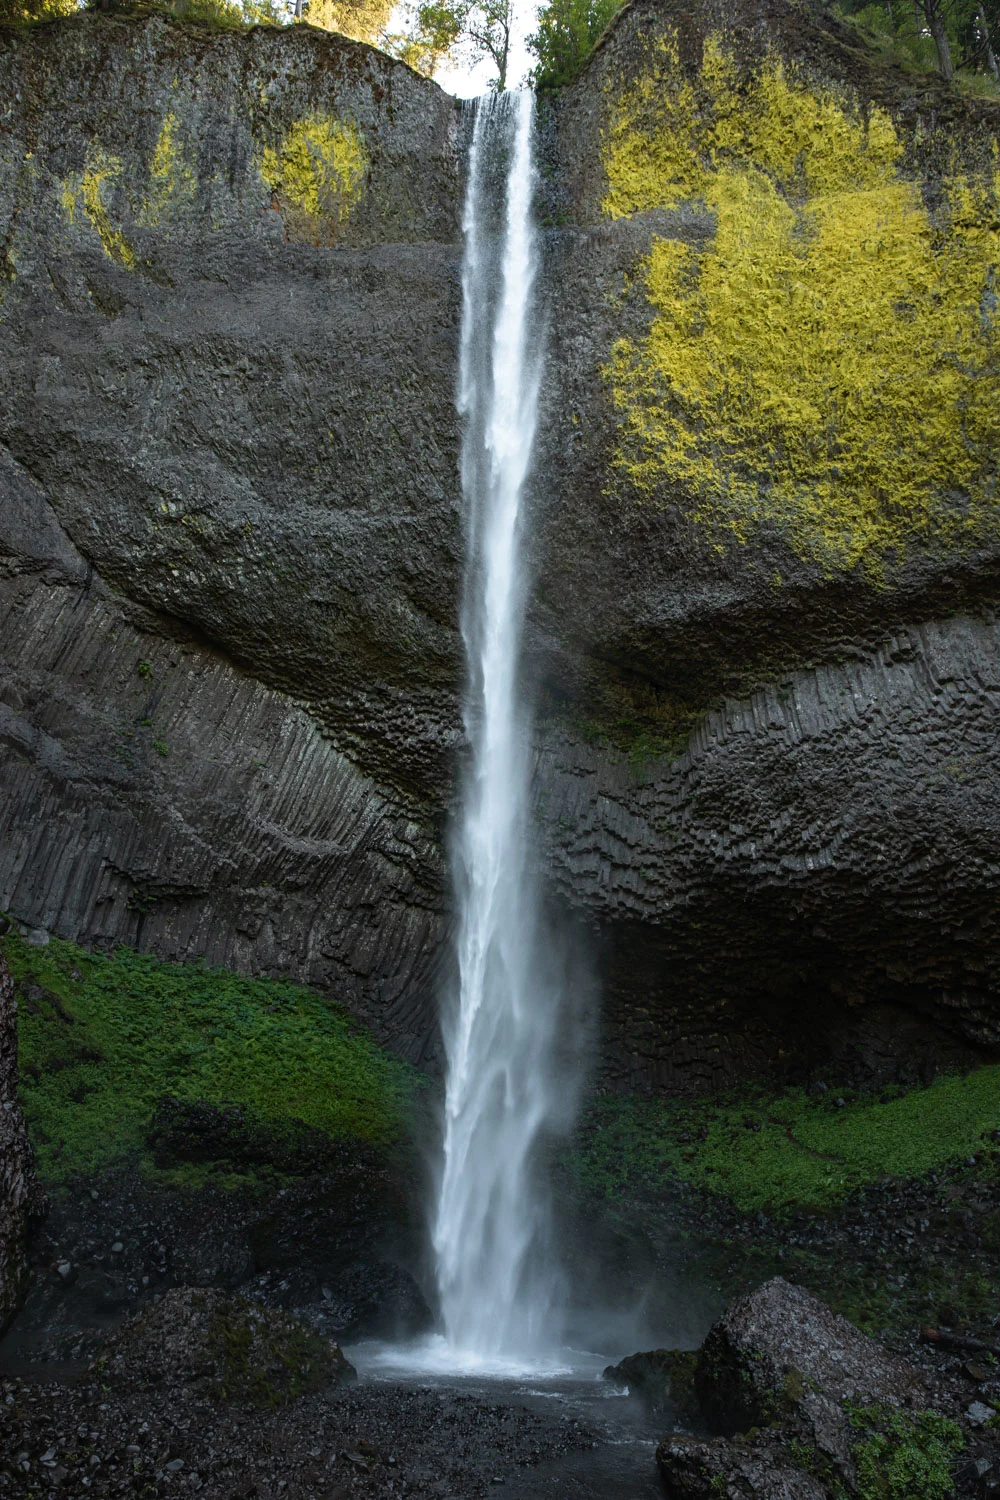 Latourell Falls is one of the easiest Columbia River Gorge waterfalls to see